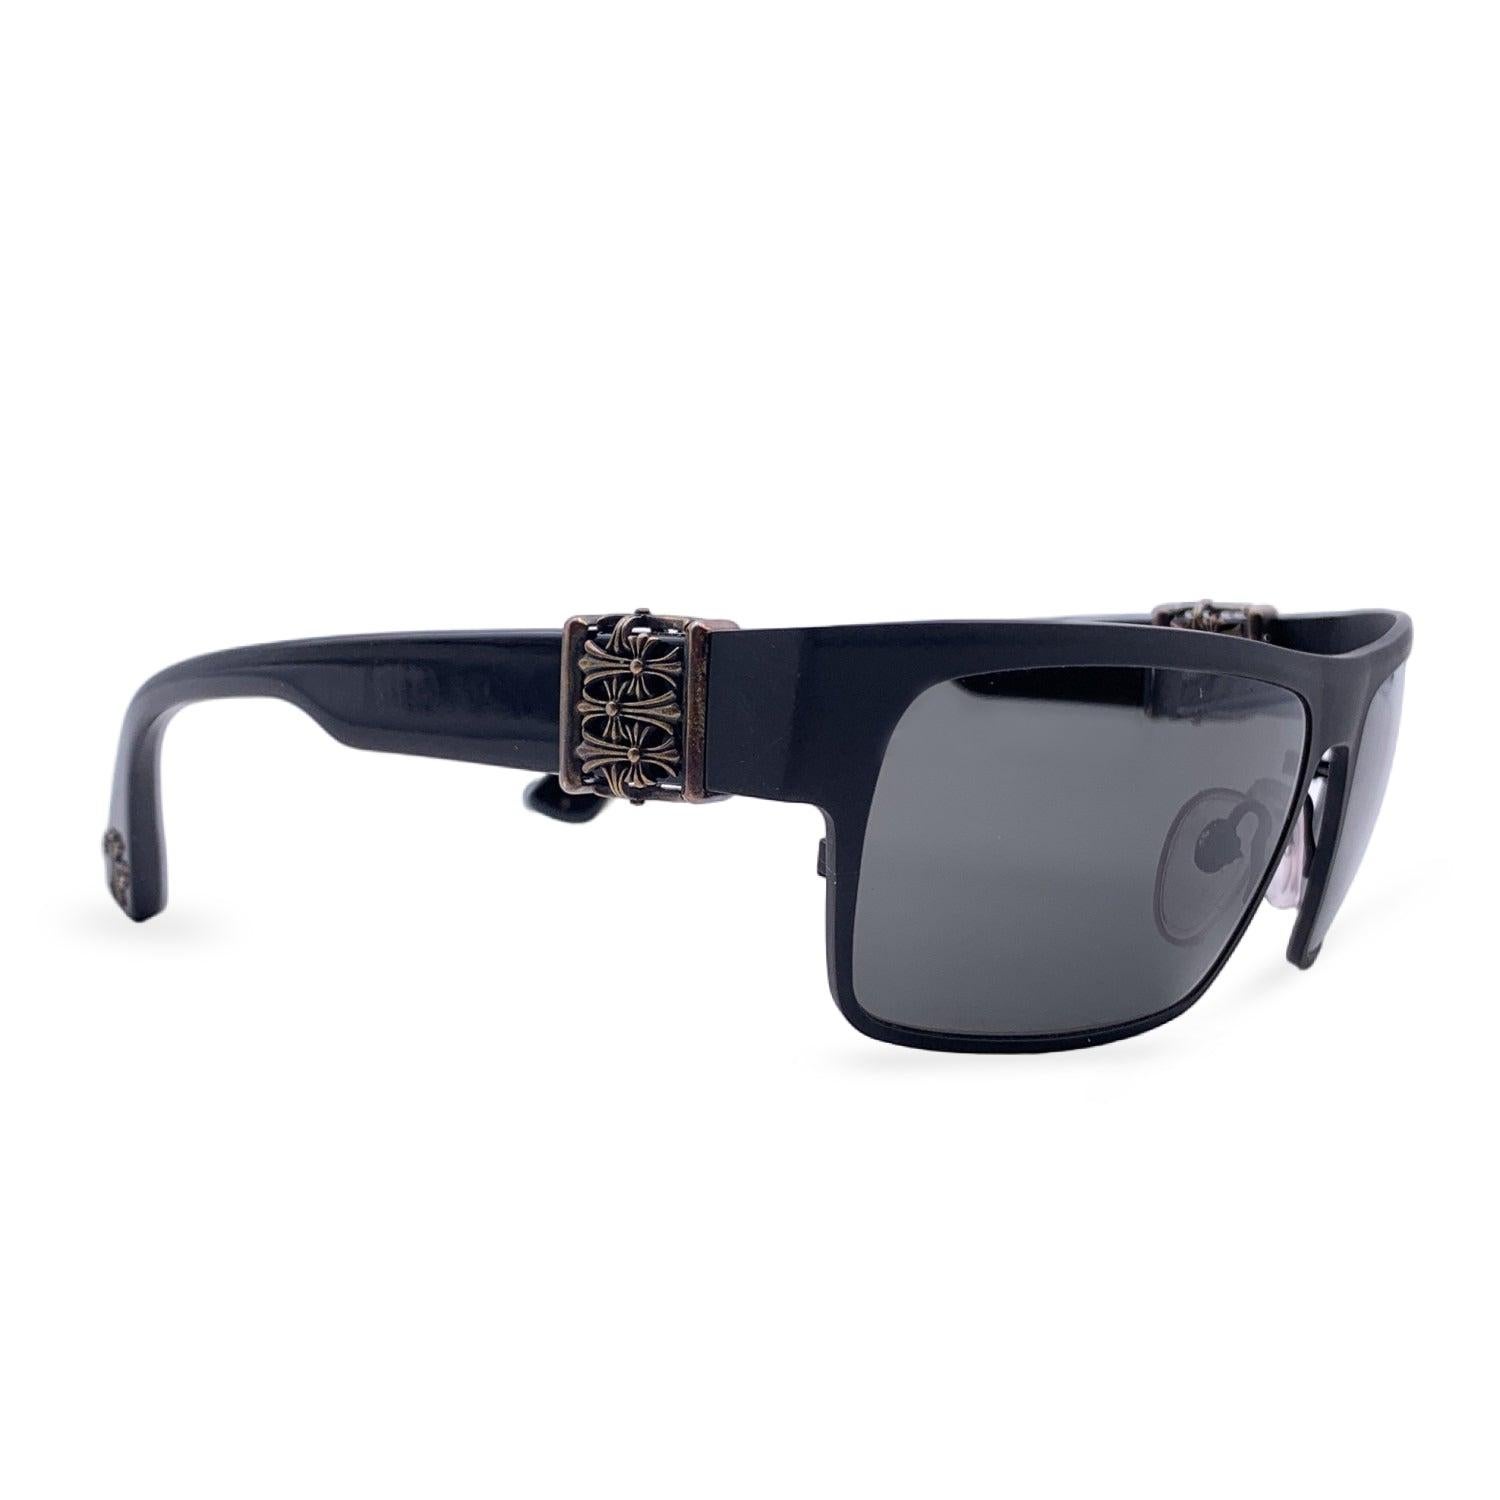 Chrome Hearts Sunglasses, Model Flavor Saver. Black metal front and acetate frame. Sterling silver detailing on temples and at the end of the ear stems. Original grey ZEISS lenses. Mods & refs: FLAVOR SAVER - MBK-BK - 61/16 - 136. Come with their